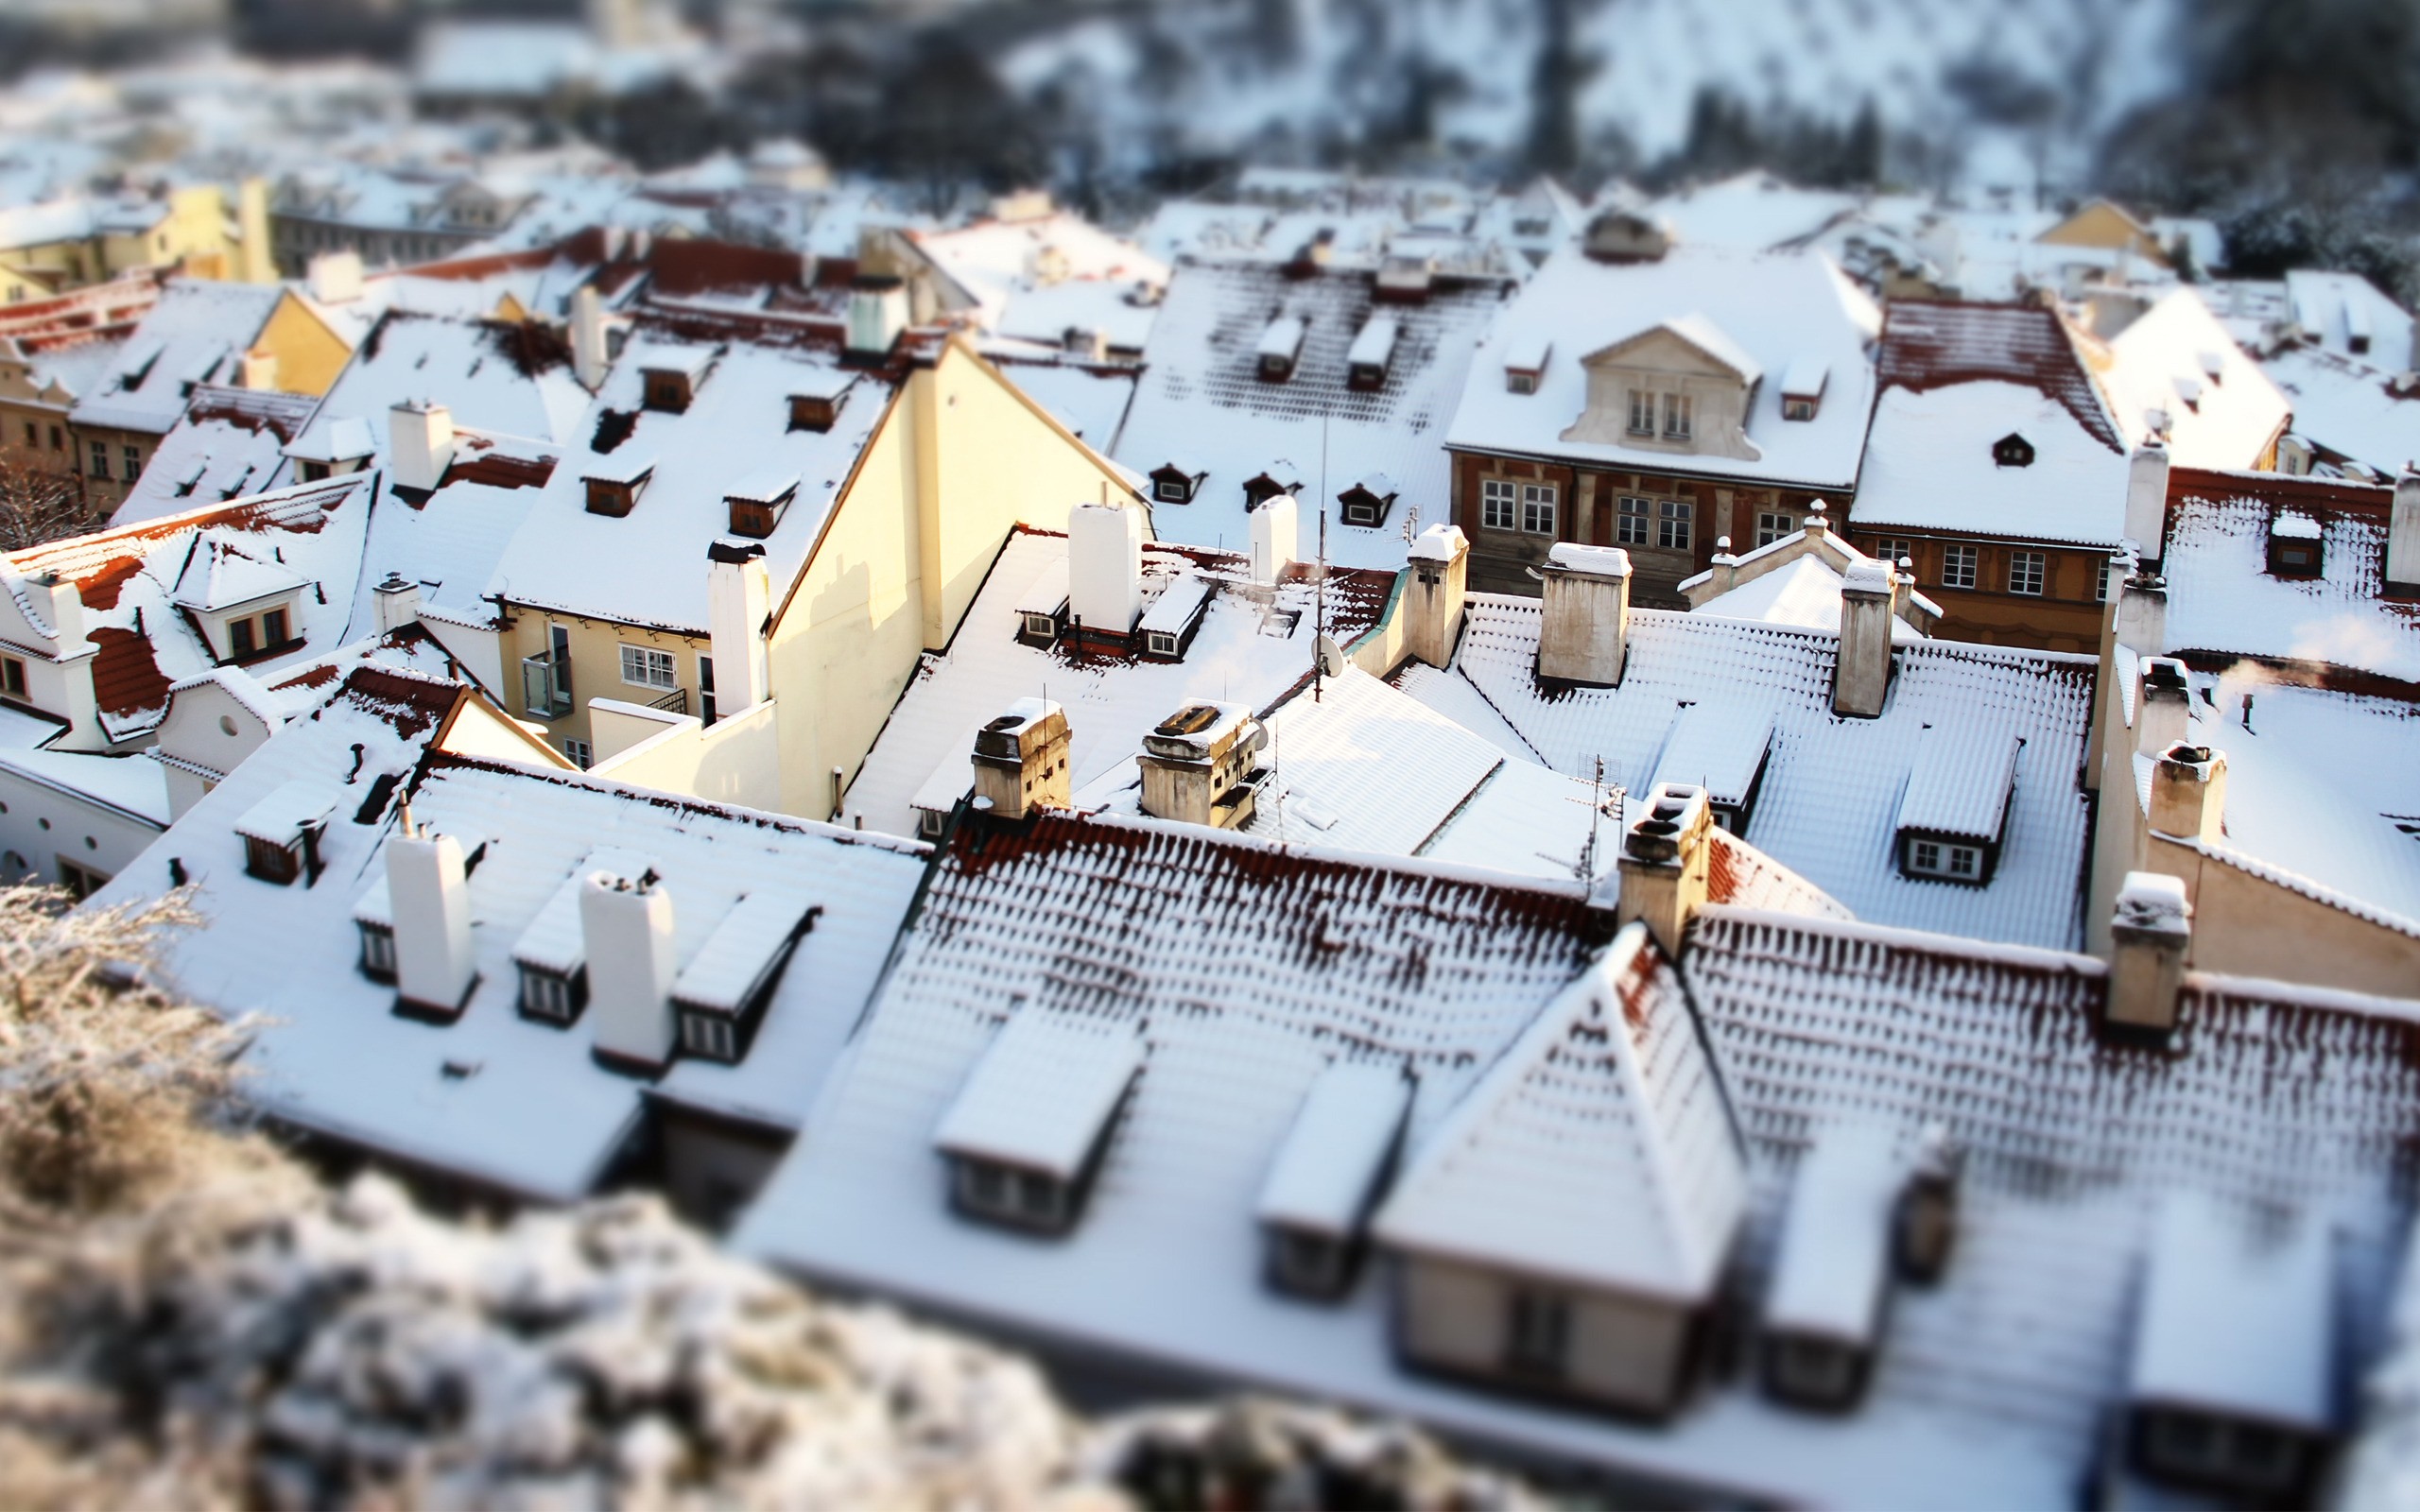 General 2560x1600 house building tilt shift snow rooftops winter village aerial view outdoors